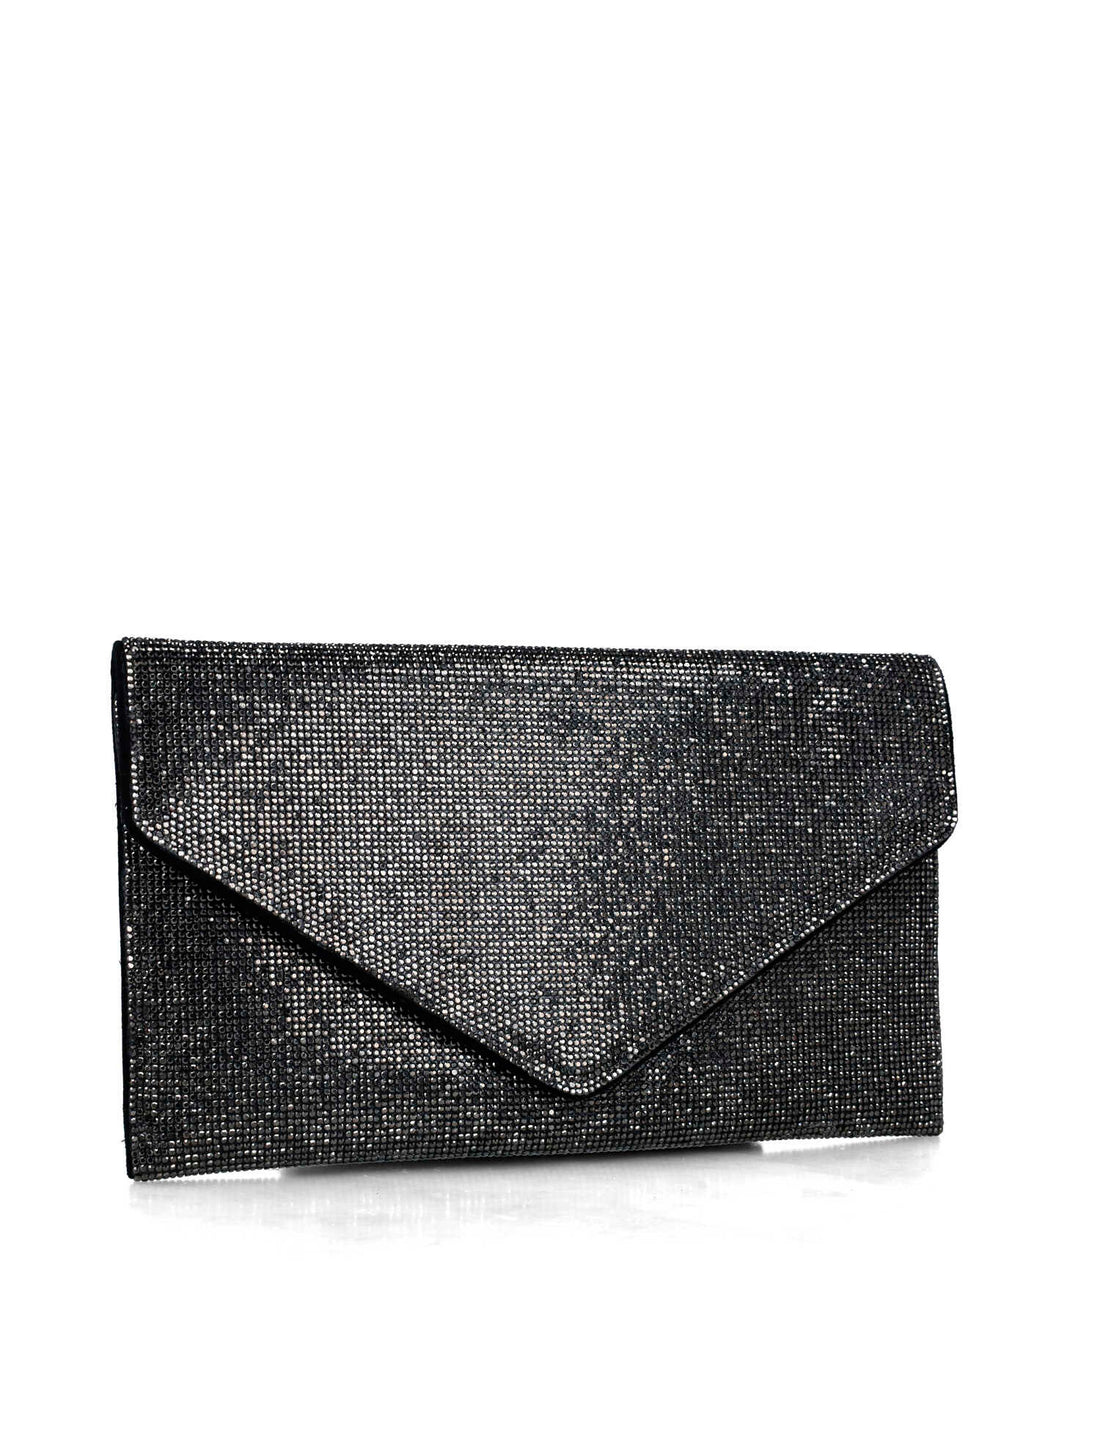 Black Clutch With All Over Embellishment_85611_01_02